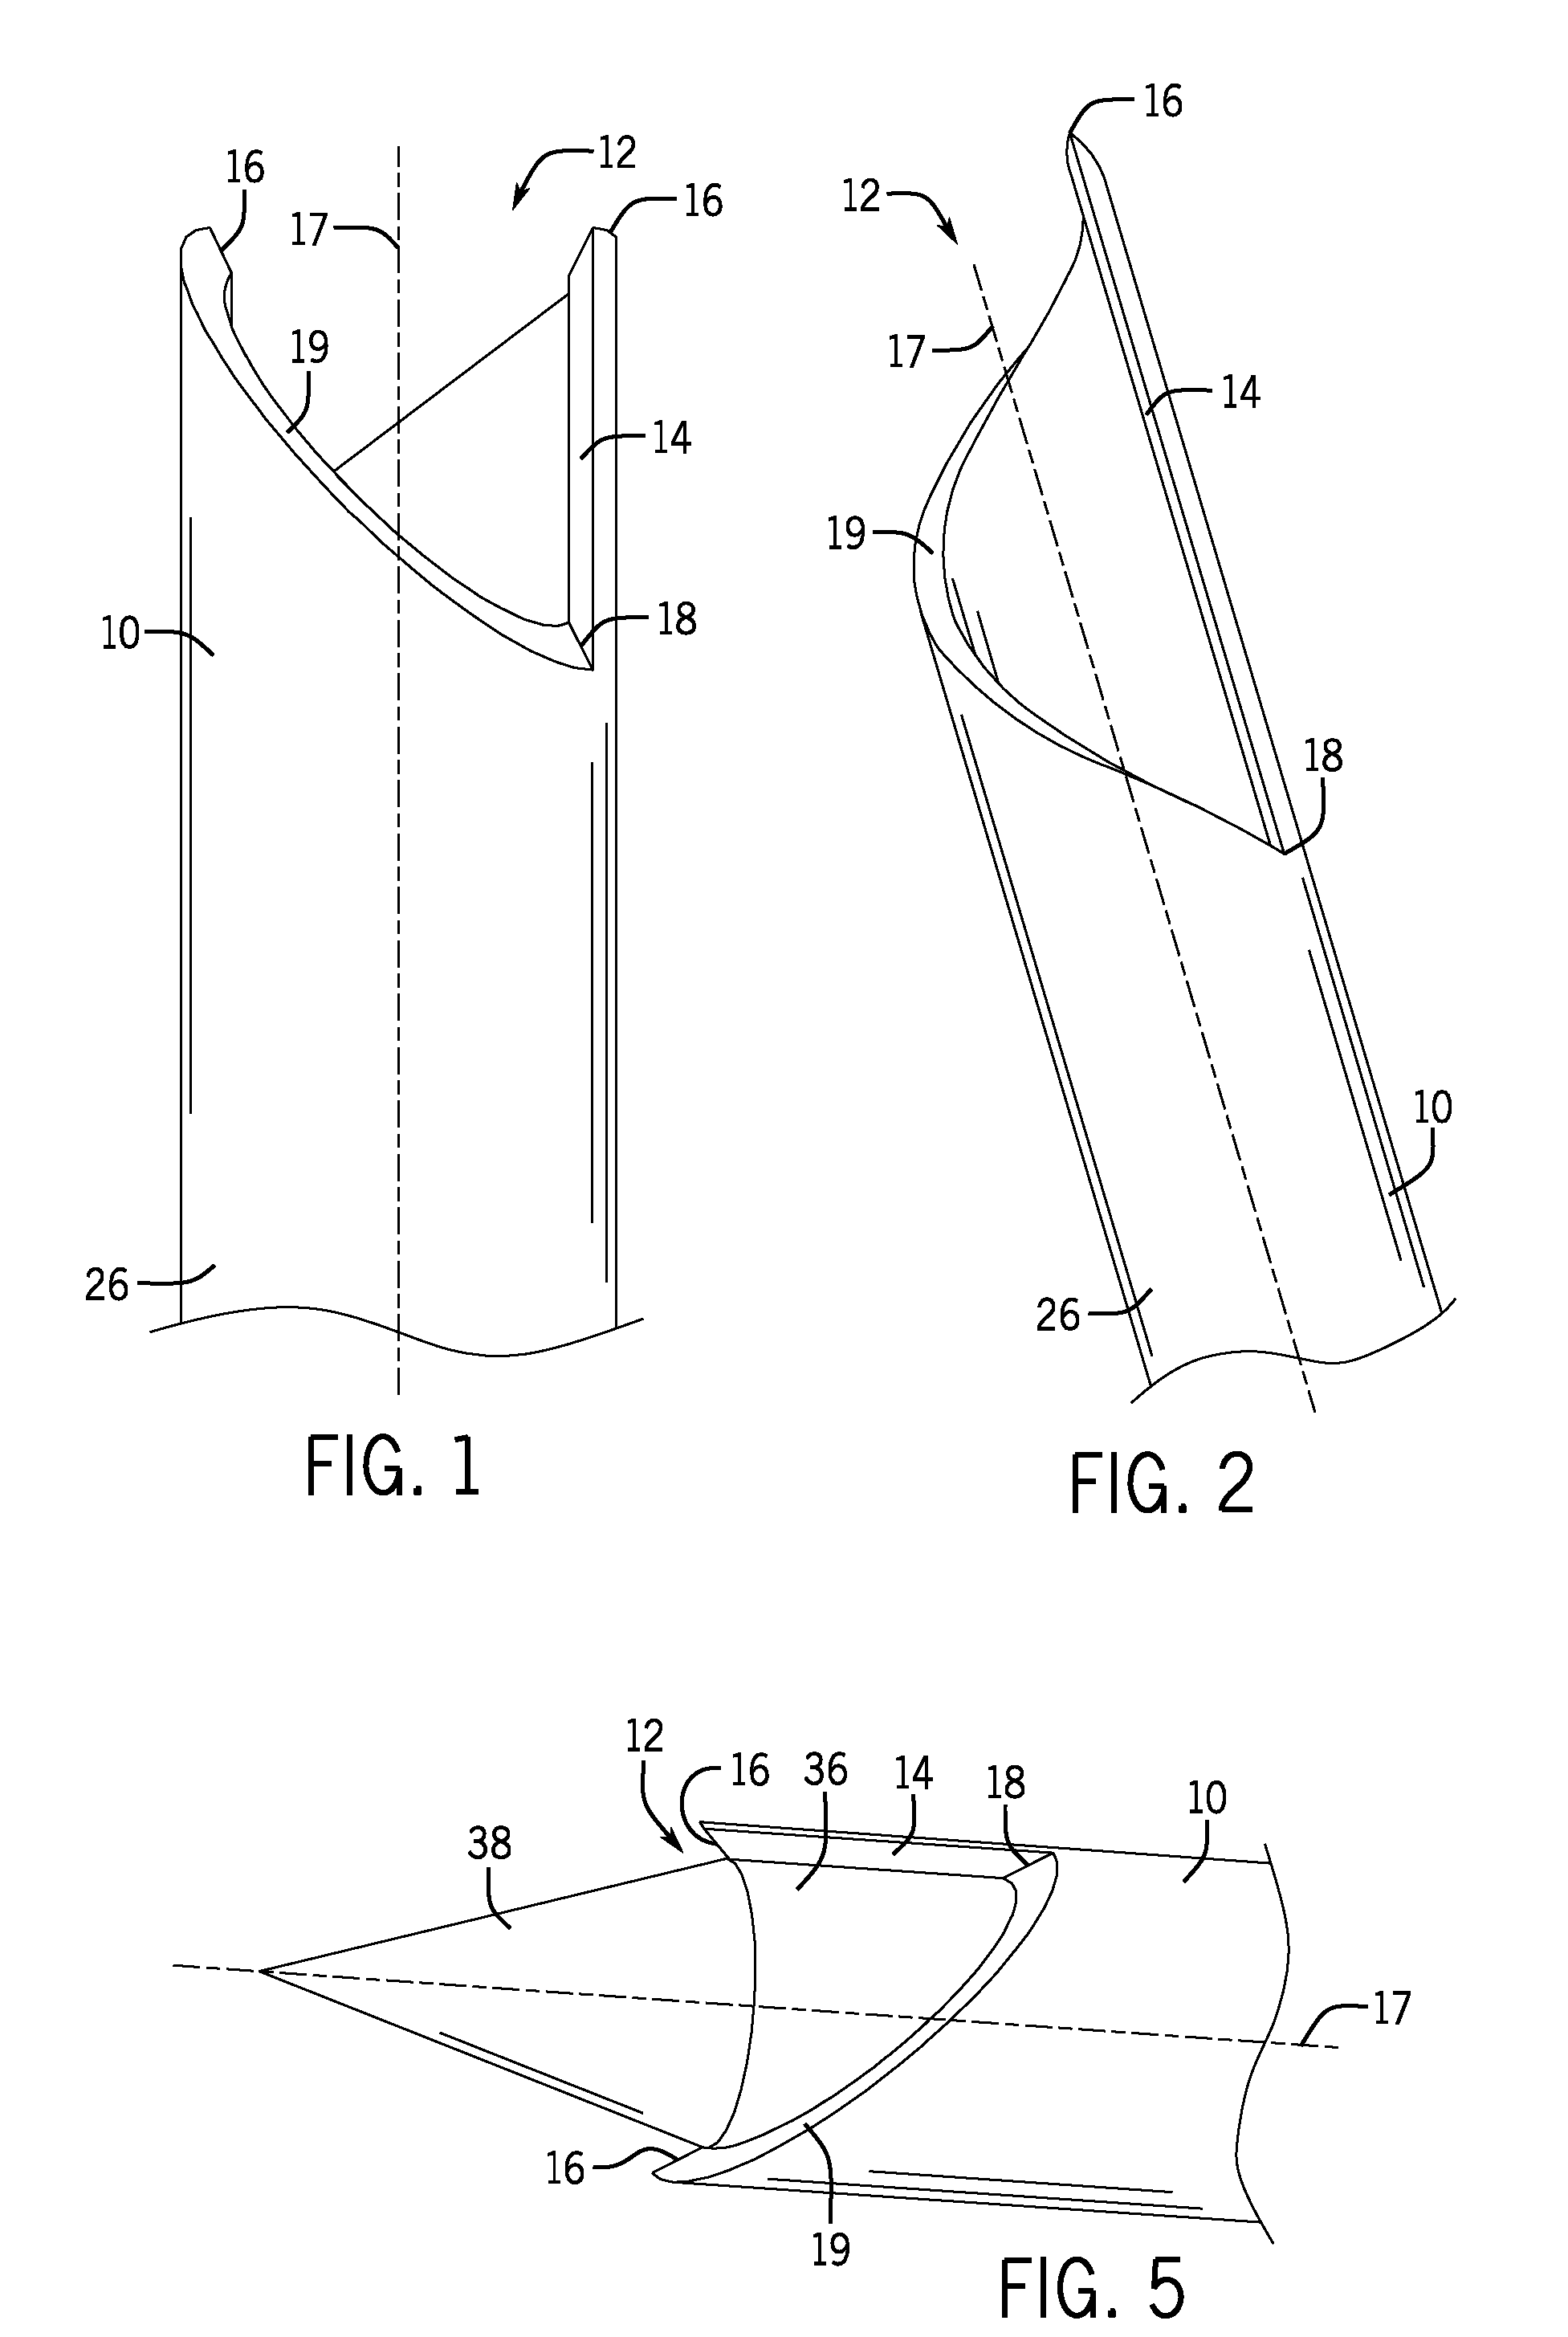 System and method for fine needle aspiration